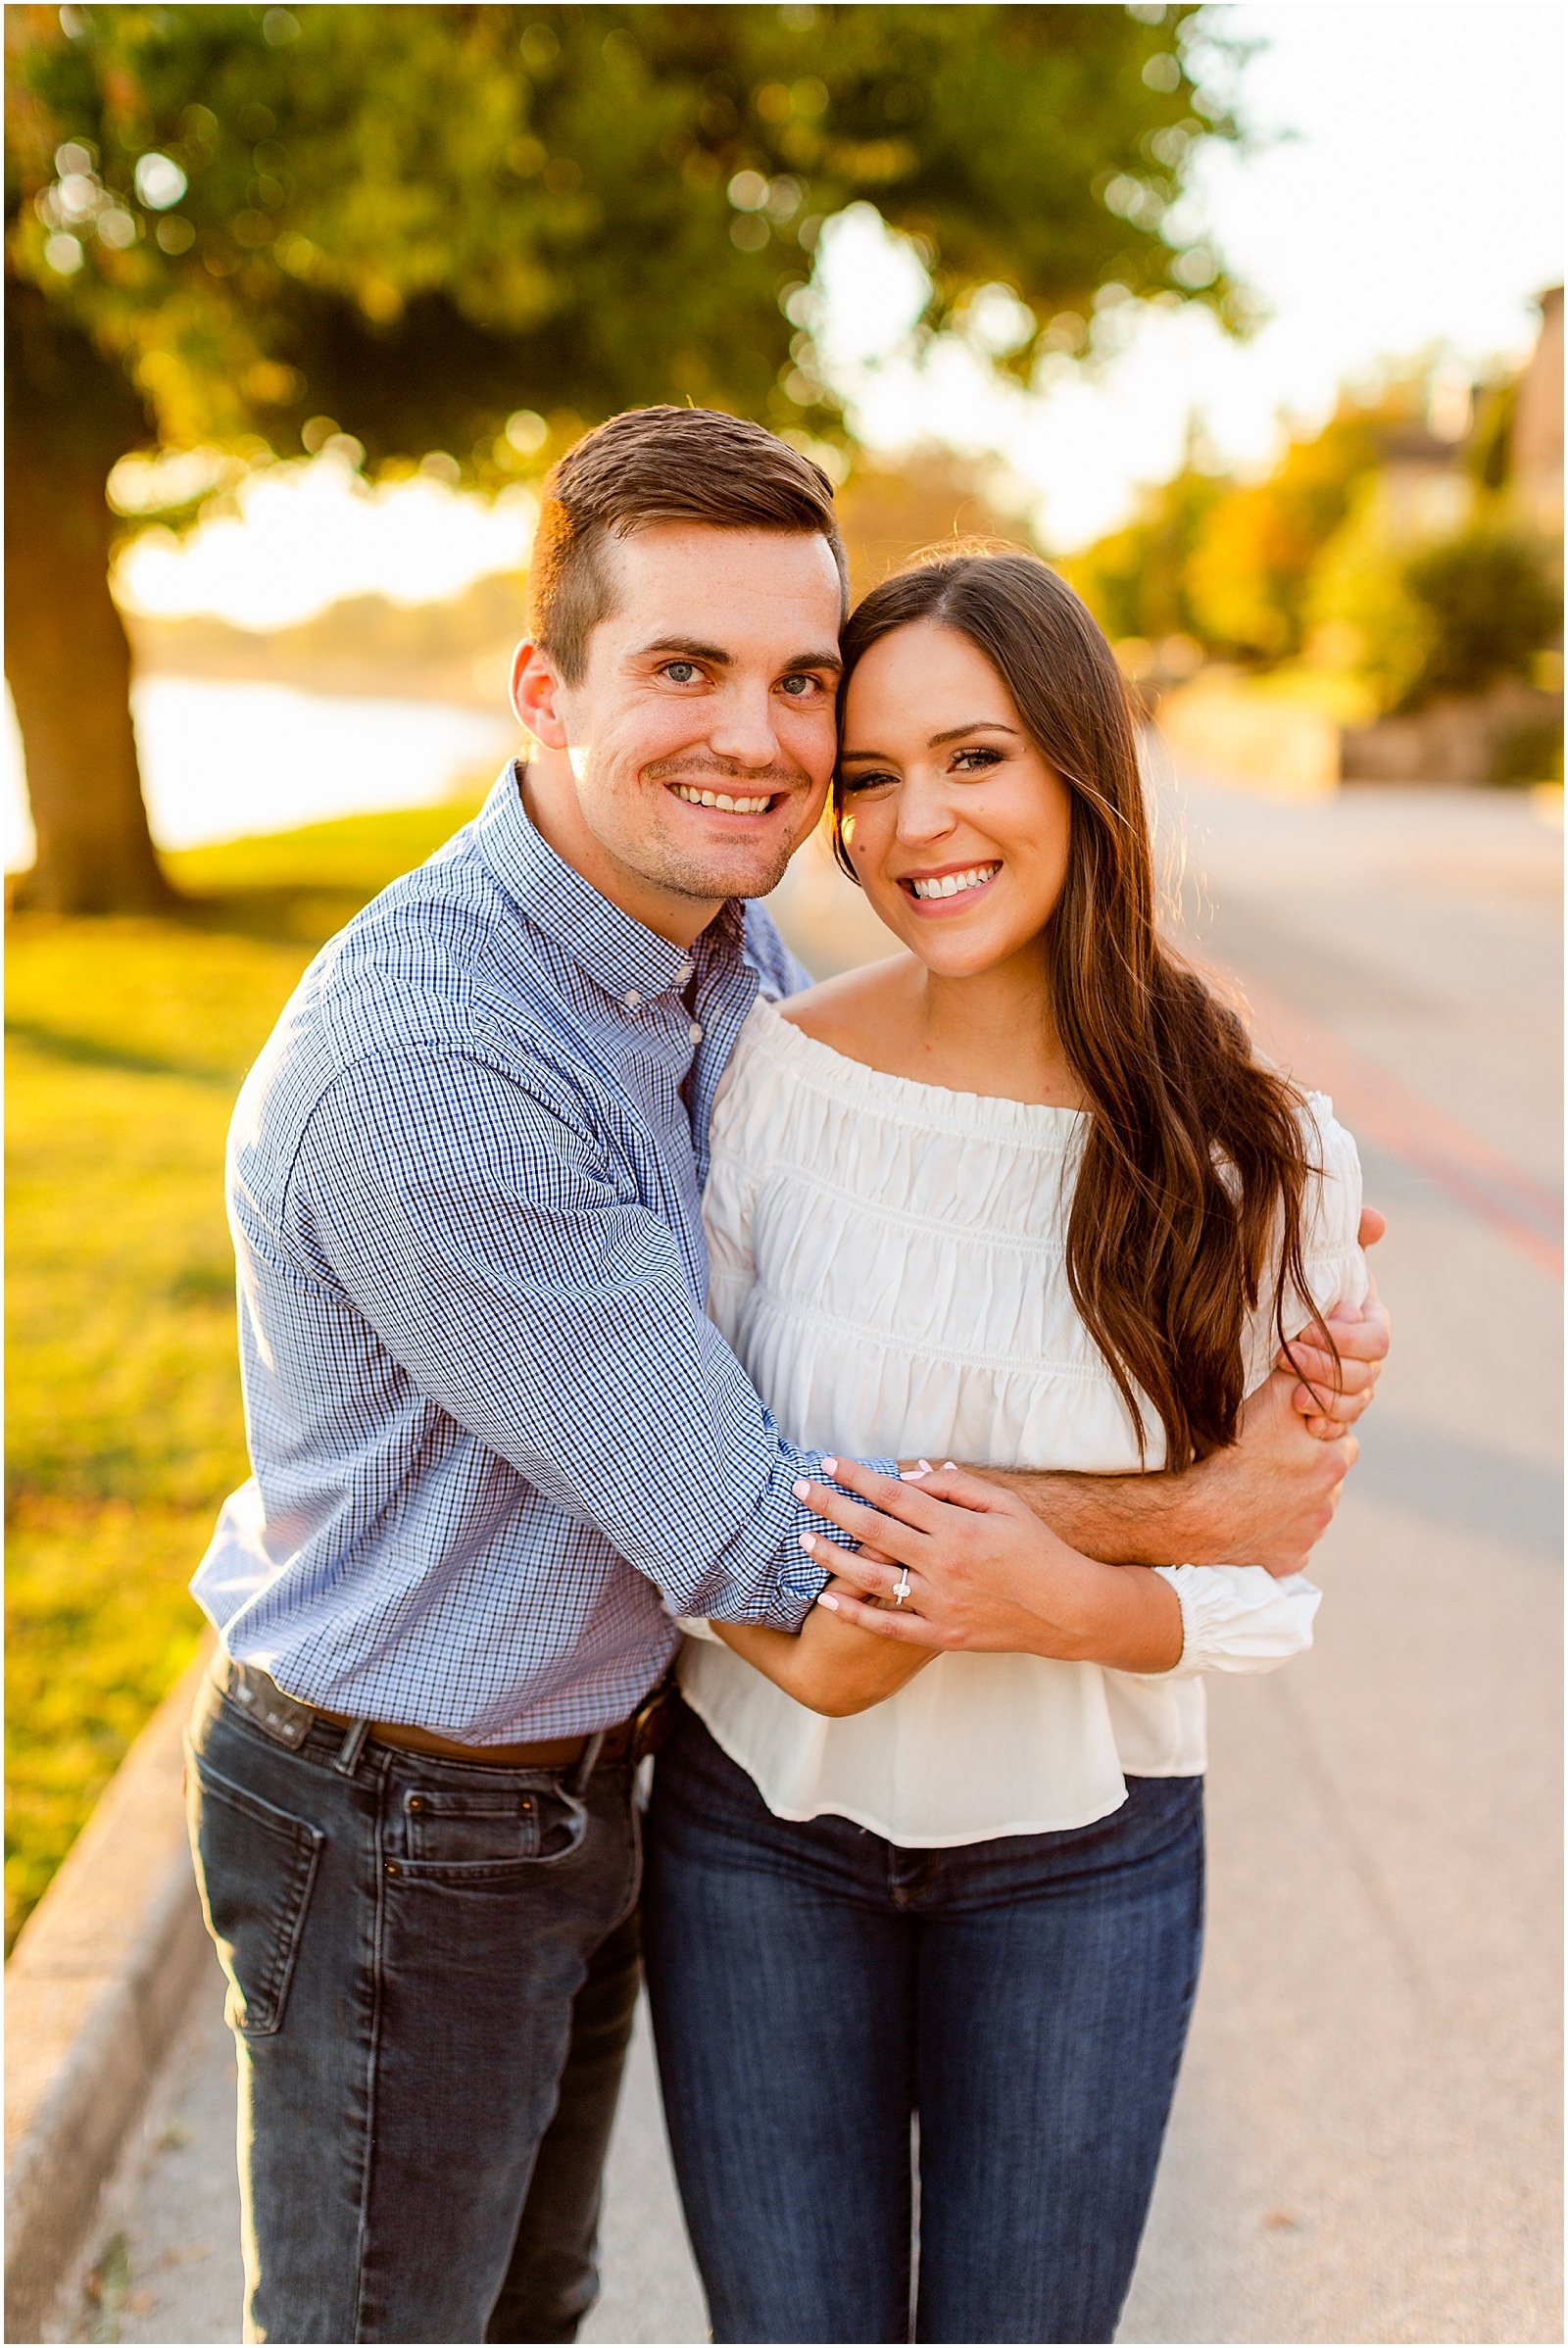 Emma and Jace's Downtown Newburgh Engagement Session | Bret and Brandie Photography | Evansville Indiana Wedding Photographers_0045.jpg